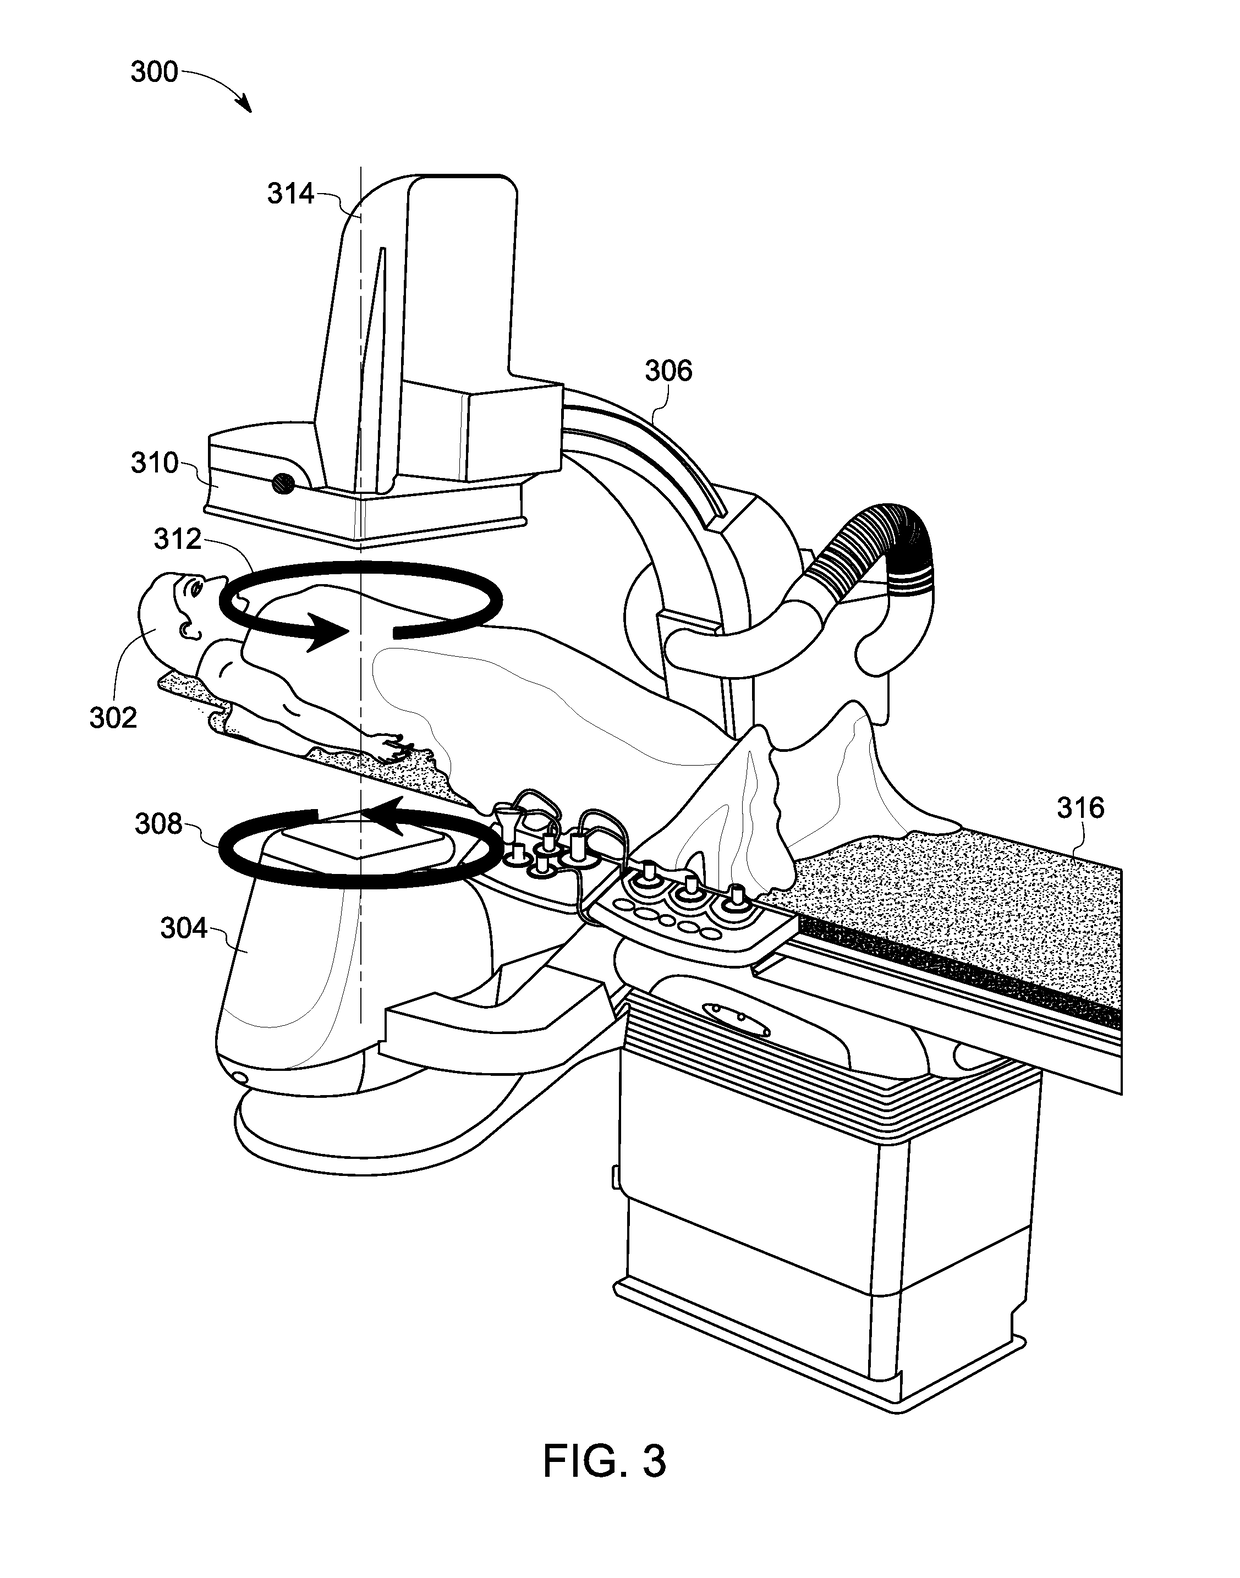 Multi-perspective interventional imaging using a single imaging system